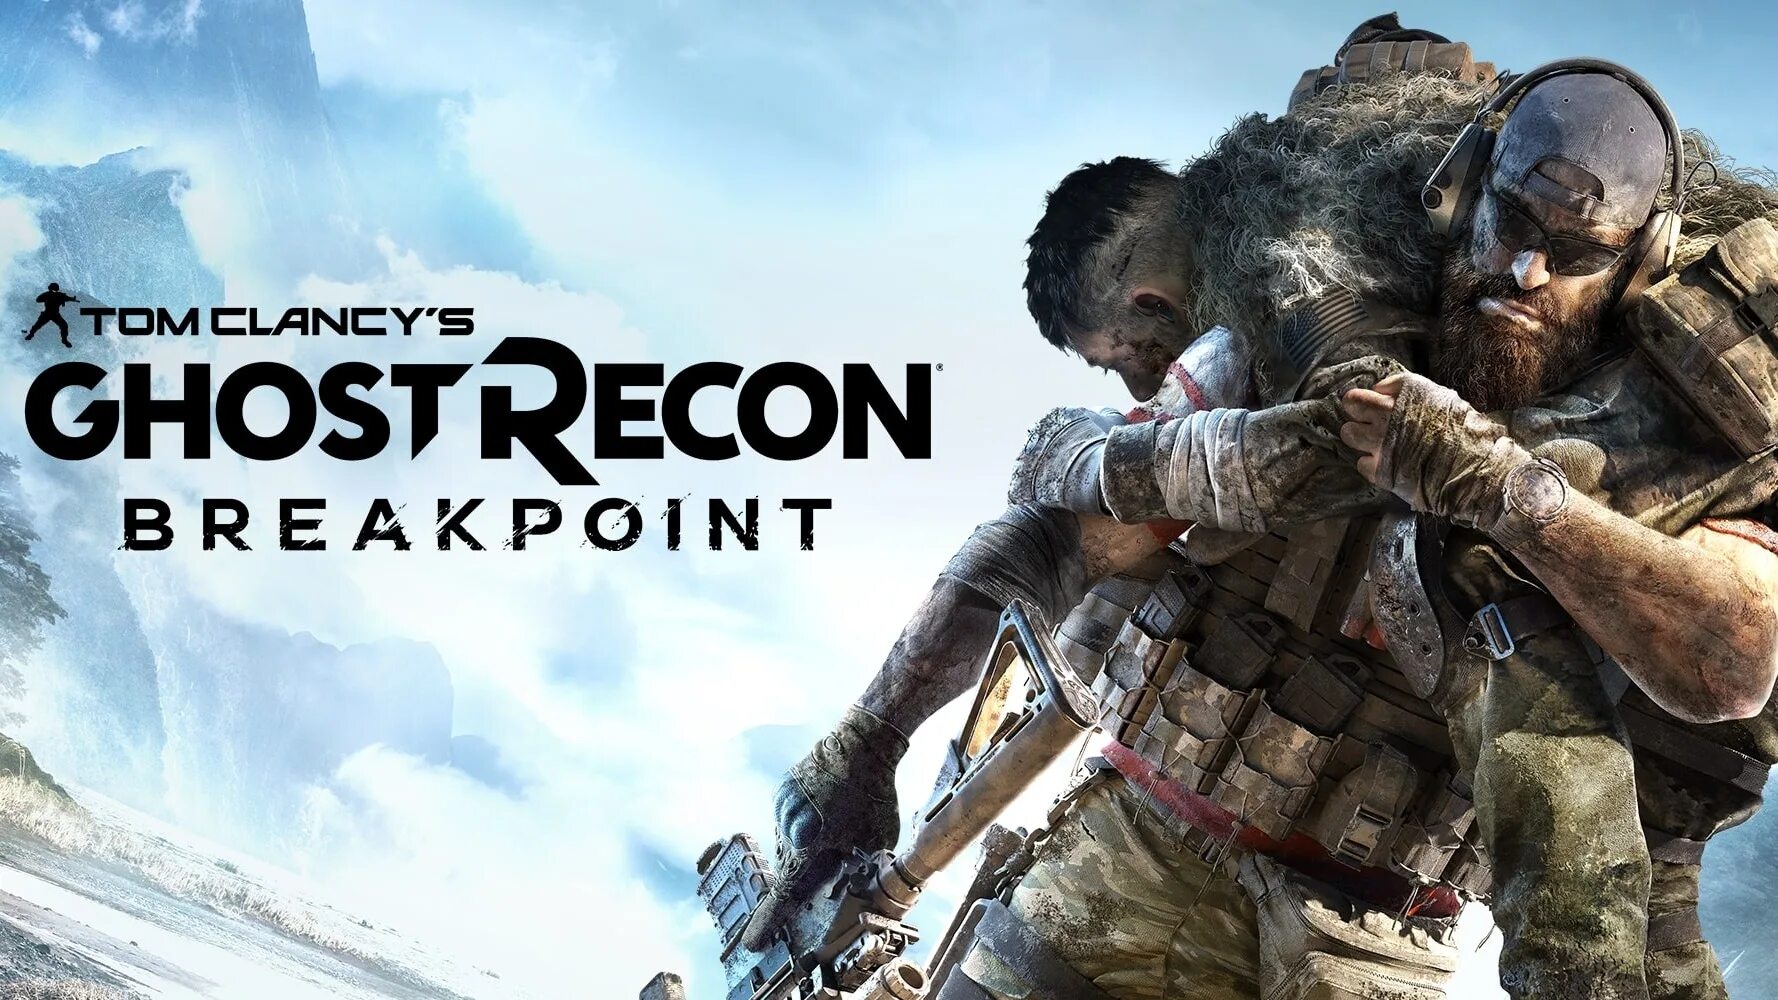 Overlord 3 1 ghost recon breakpoint. Tom Clancy's Ghost Recon Wildlands ВДВ. Tom Clancy's Ghost Recon: breakpoint. Tom Clancys Ghost Recon breakpoint (Xbox one) диск. Tom Clancy's Ghost Recon breakpoint, а Wildlands.